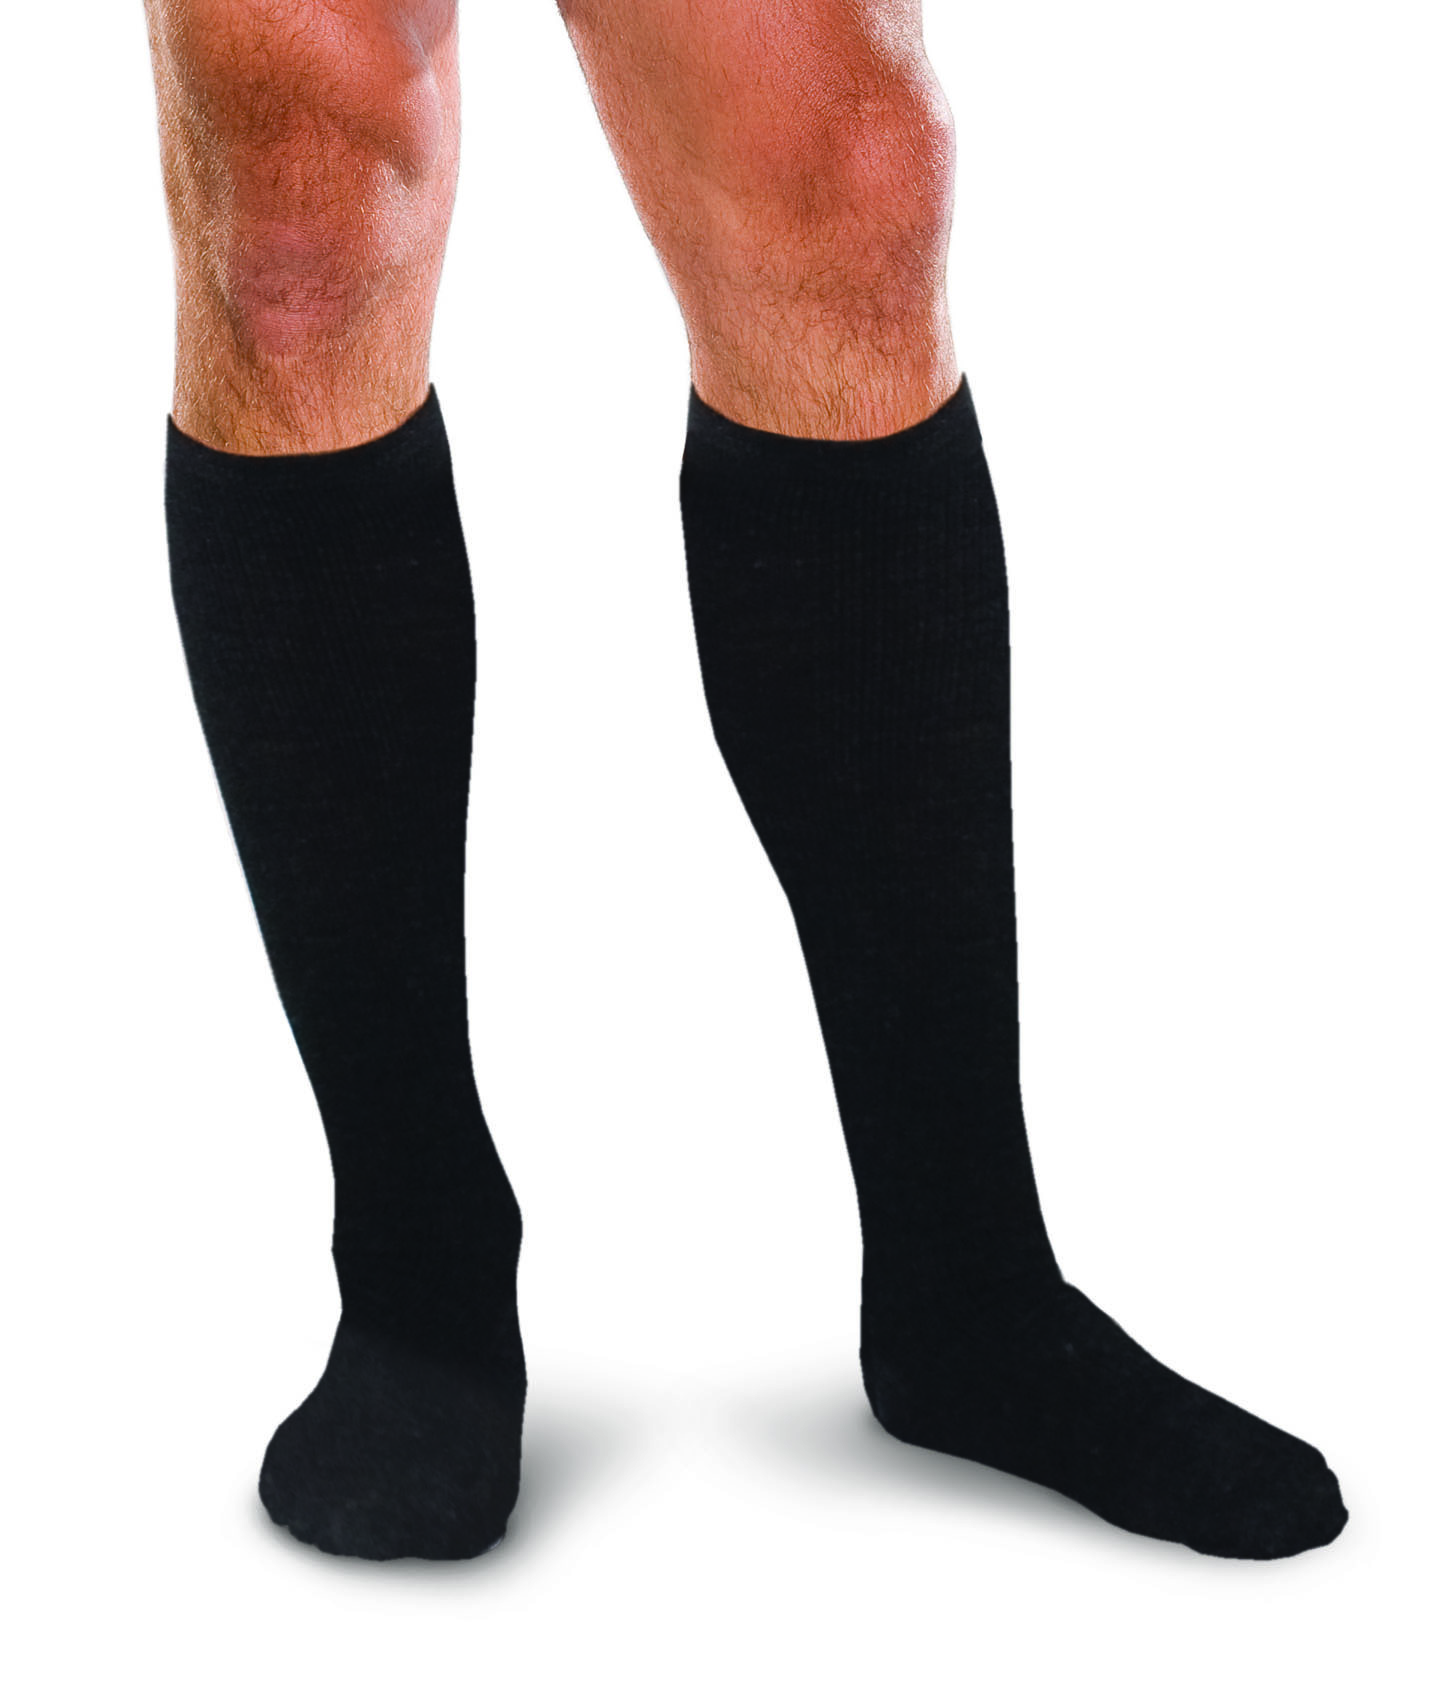 Performance Compression Thigh, Groin & Hip Support Shorts